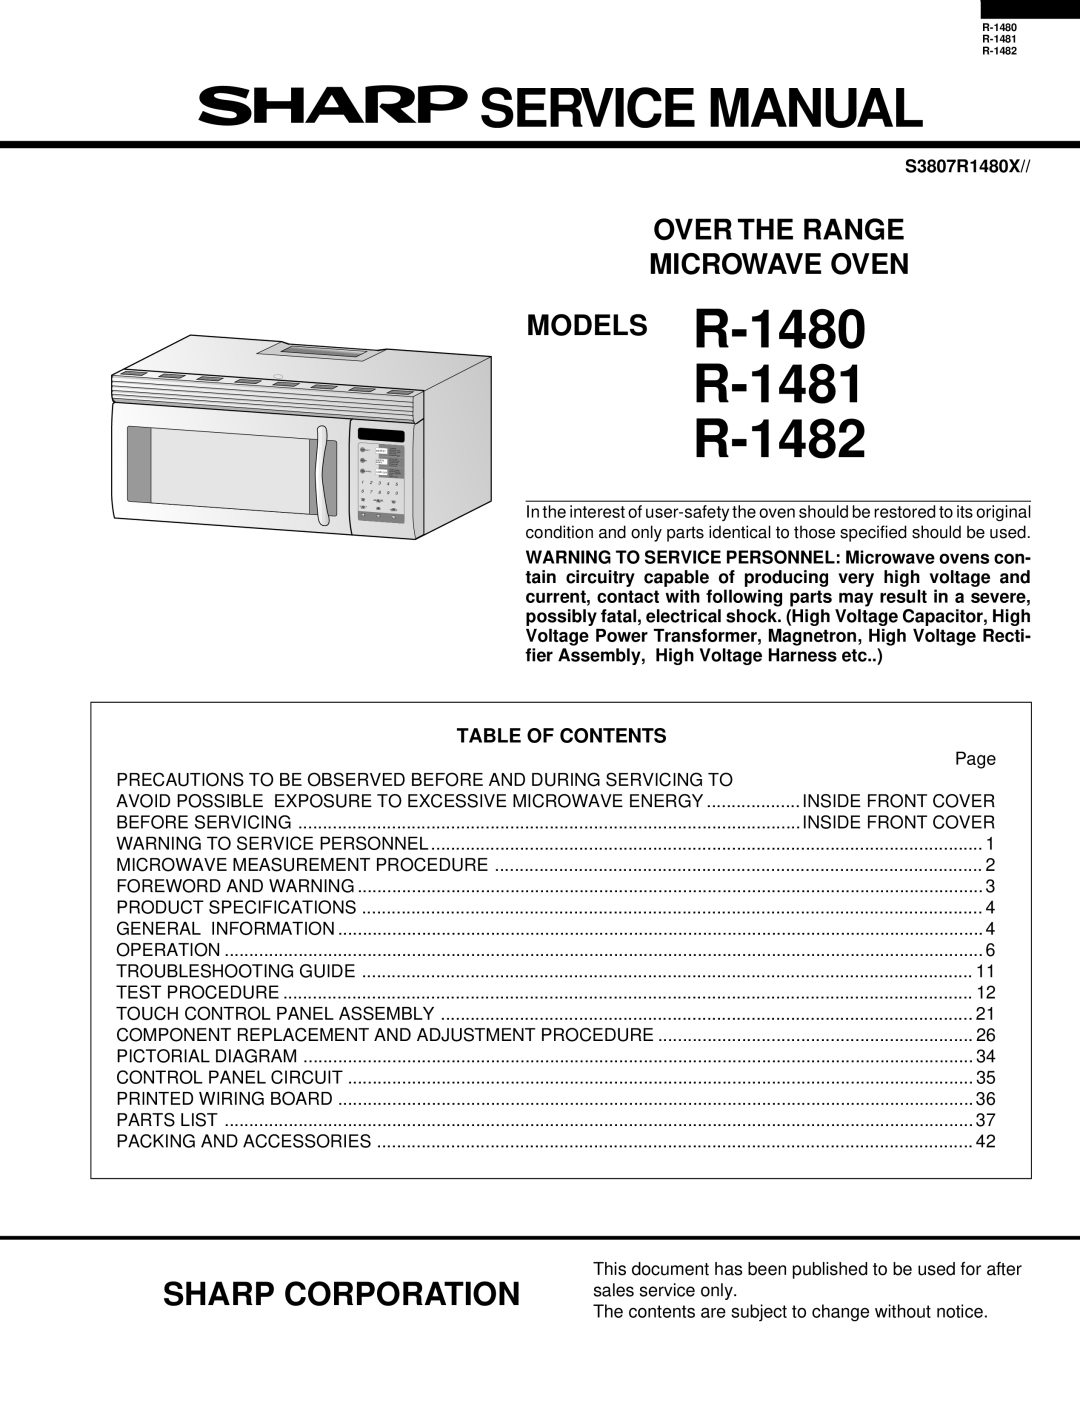 Sharp service manual Sharp Corporation, Table Of Contents, R-1481 R-1482, Over The Range Microwave Oven, MODELS R-1480 